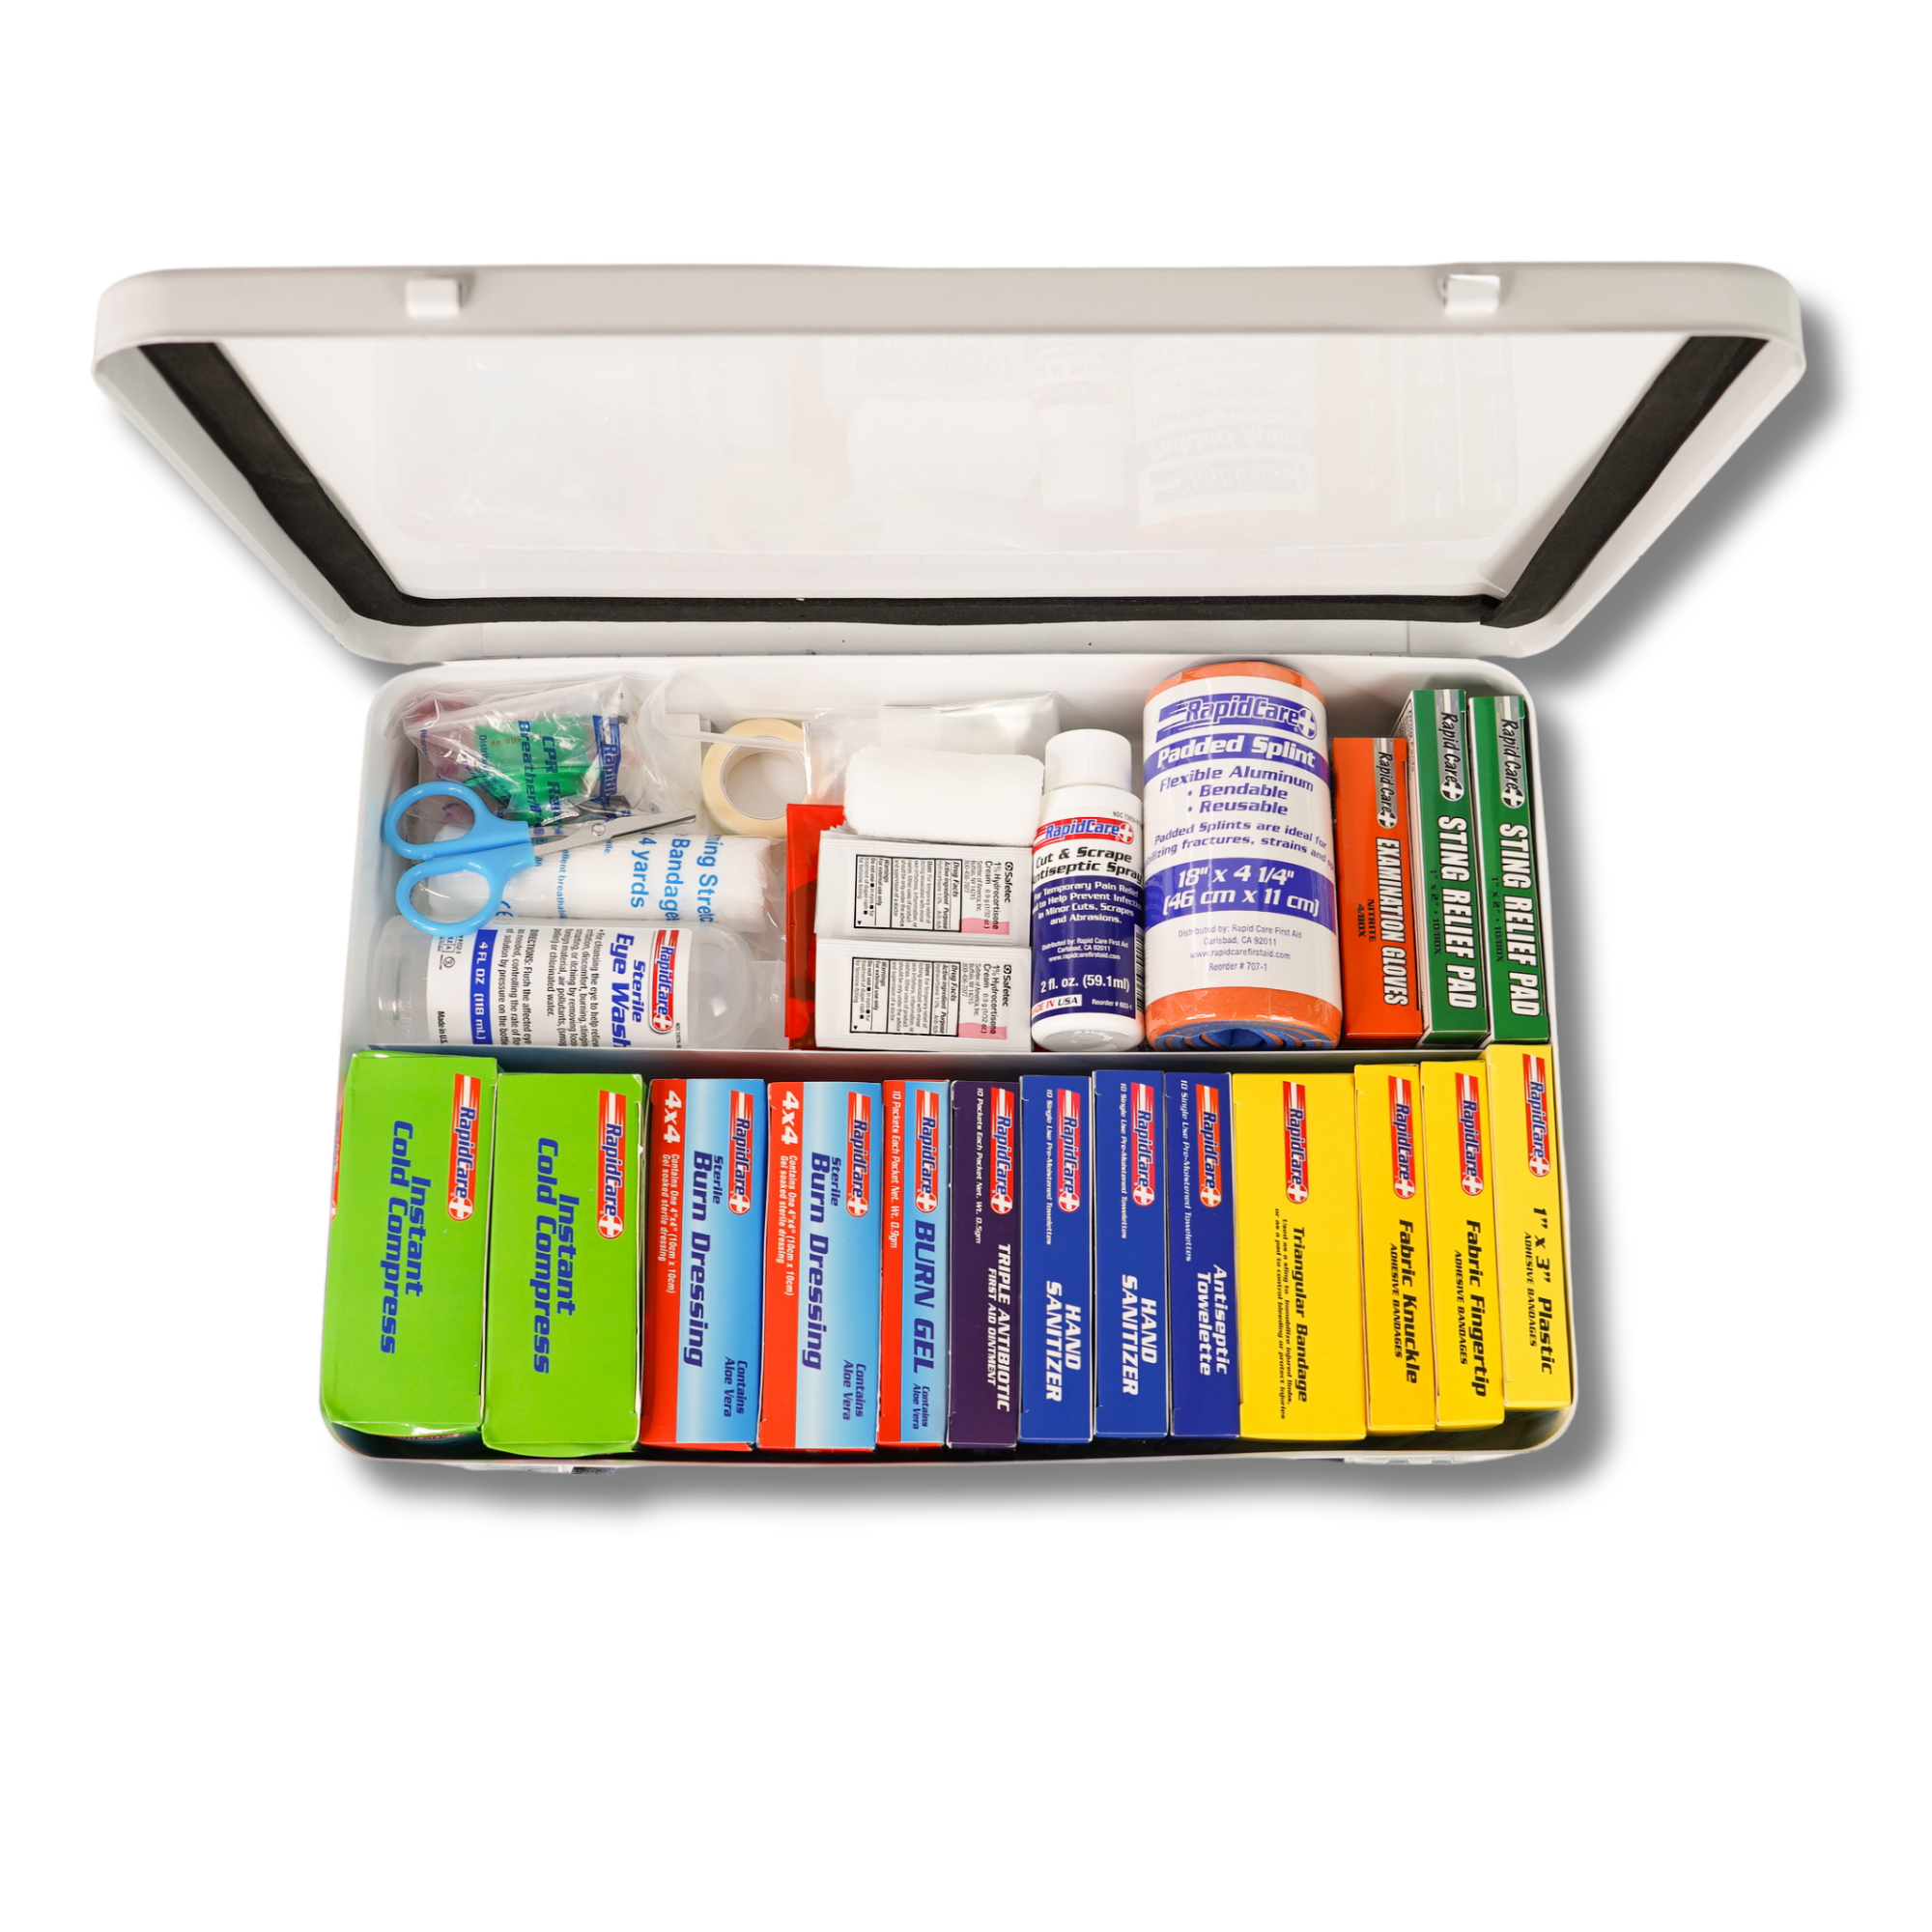 Extra Large 50 Person Unitized Metal First Aid Kit - 2021-B.